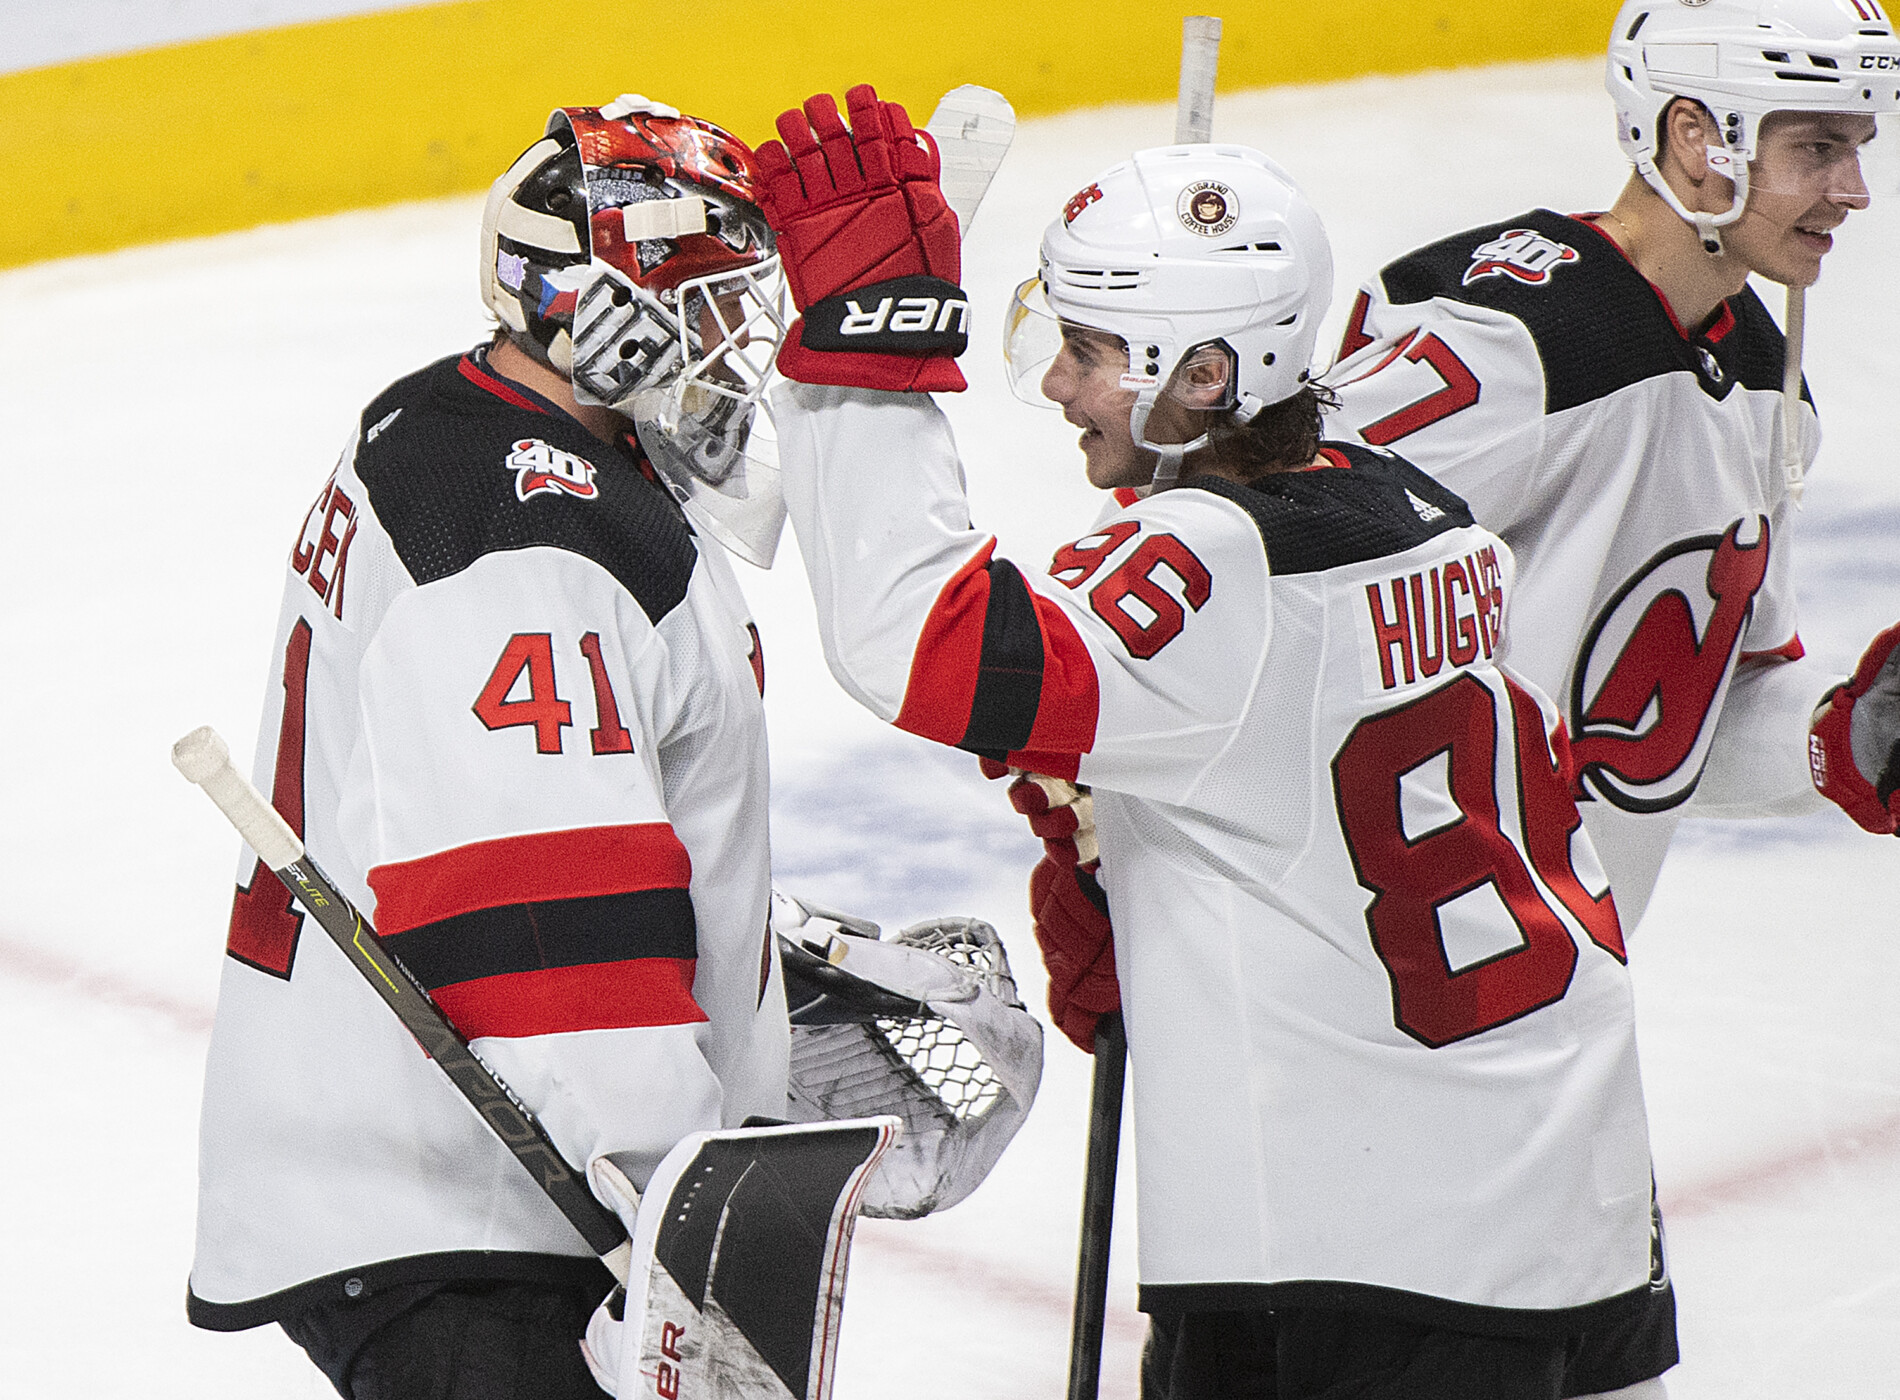 New Jersey Devils win ninth straight game as fans chant: 'Sorry, Lindy